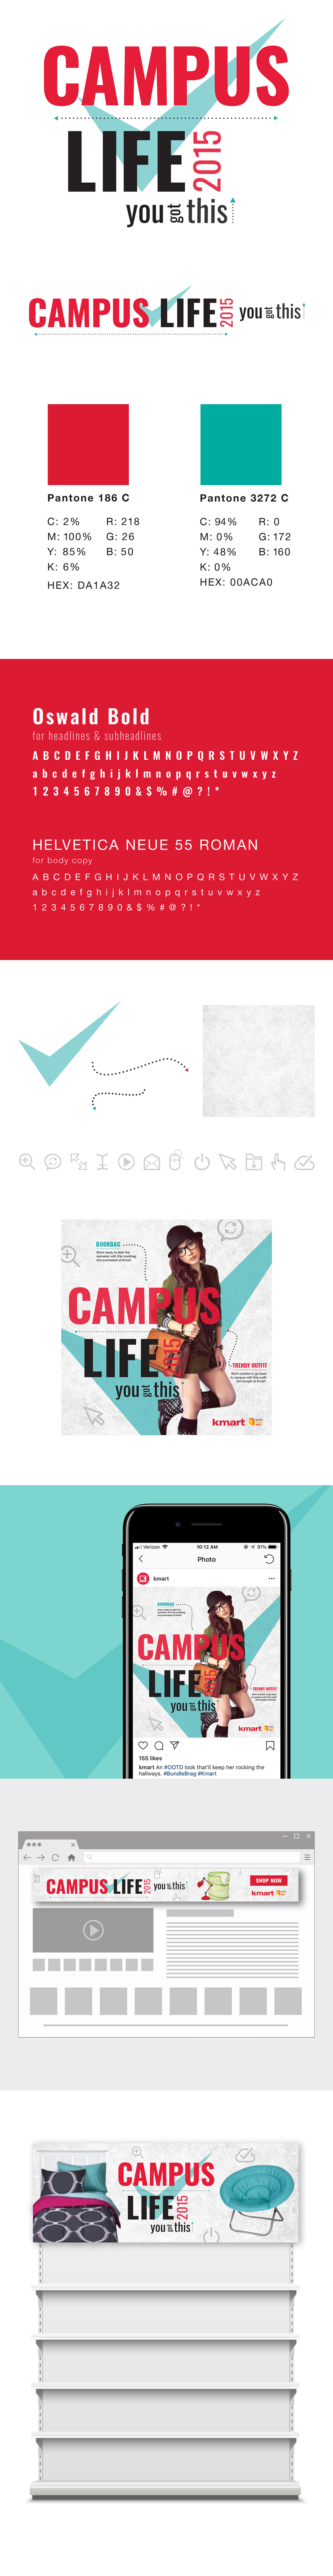 back to school branding  campus life Kmart Style Guide